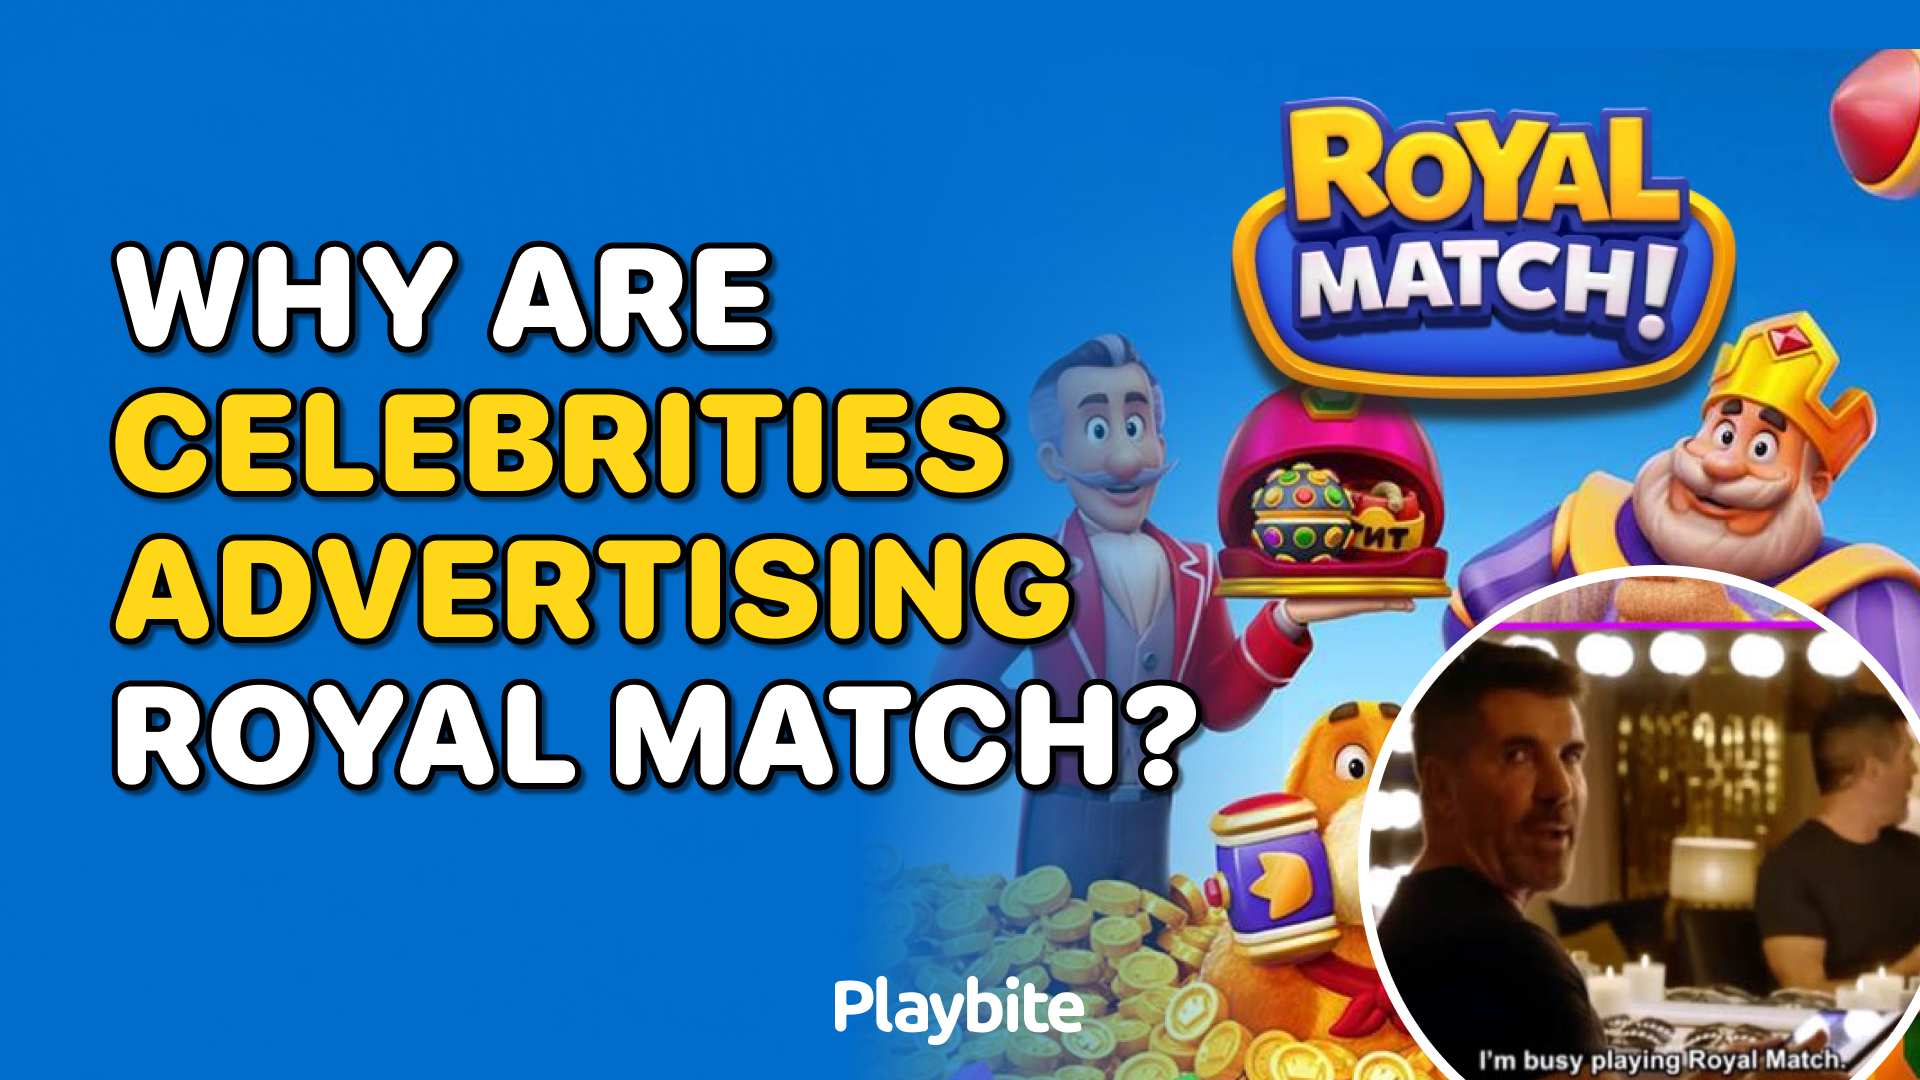 Why Are Celebrities Advertising Royal Match?